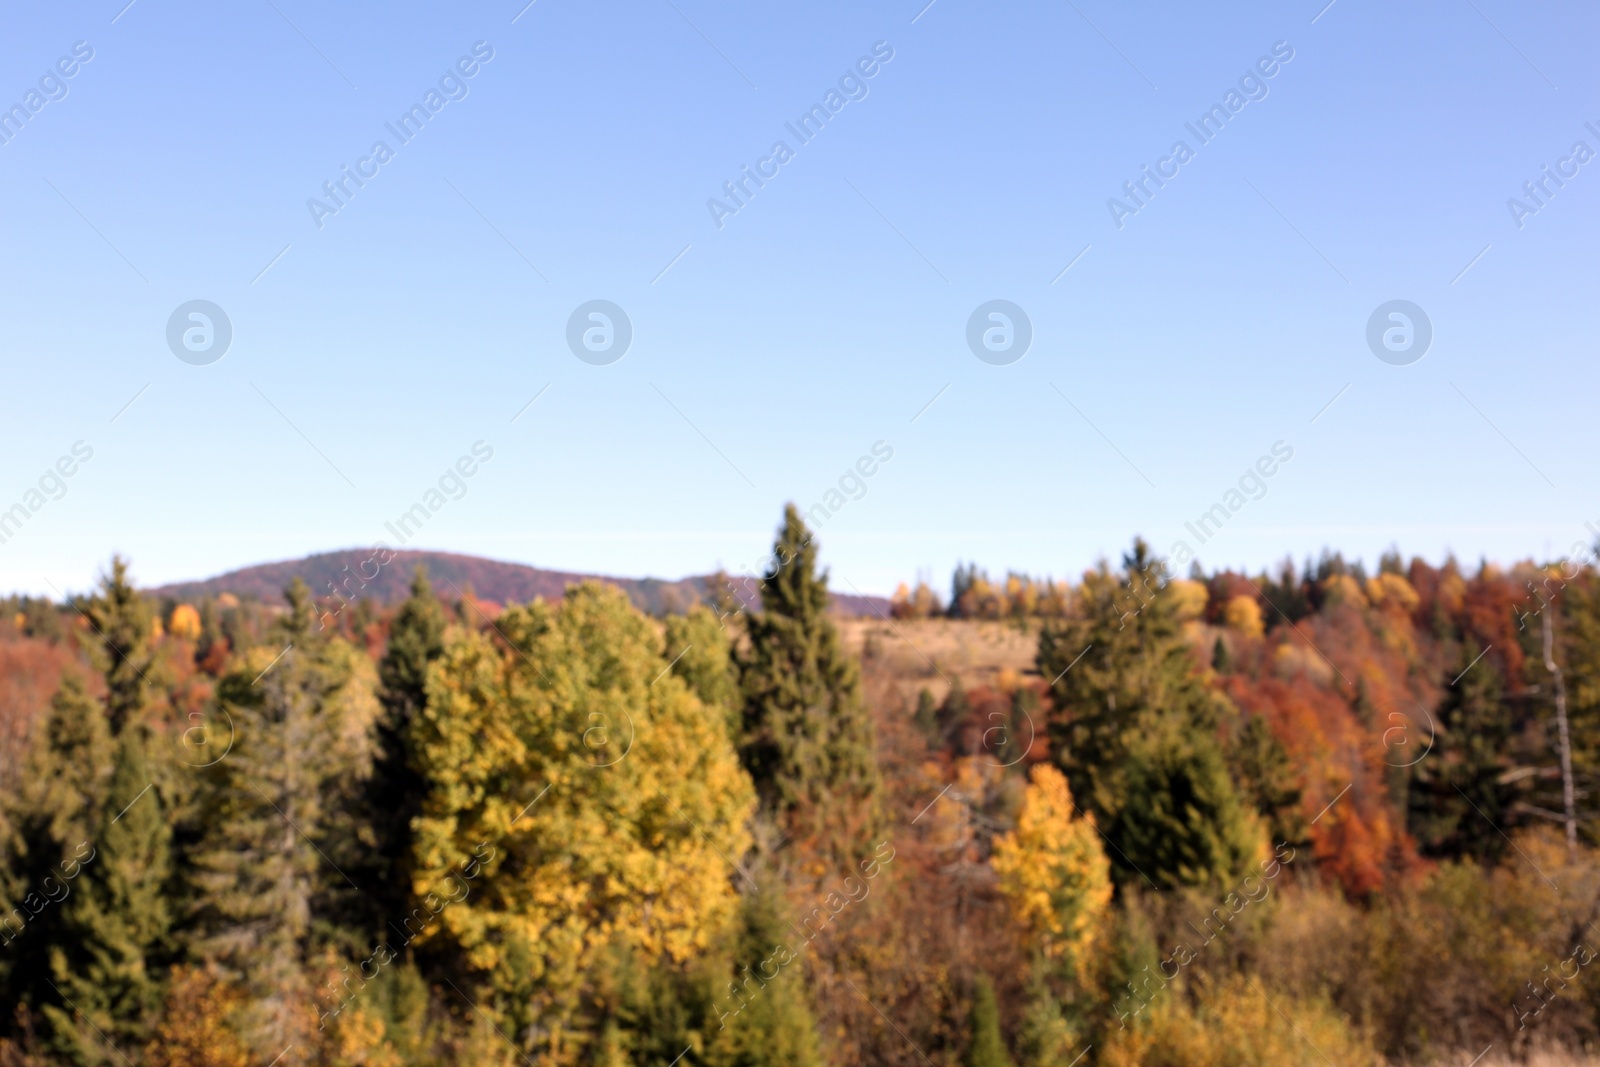 Photo of Picturesque landscape with blue sky over mountains, blurred view